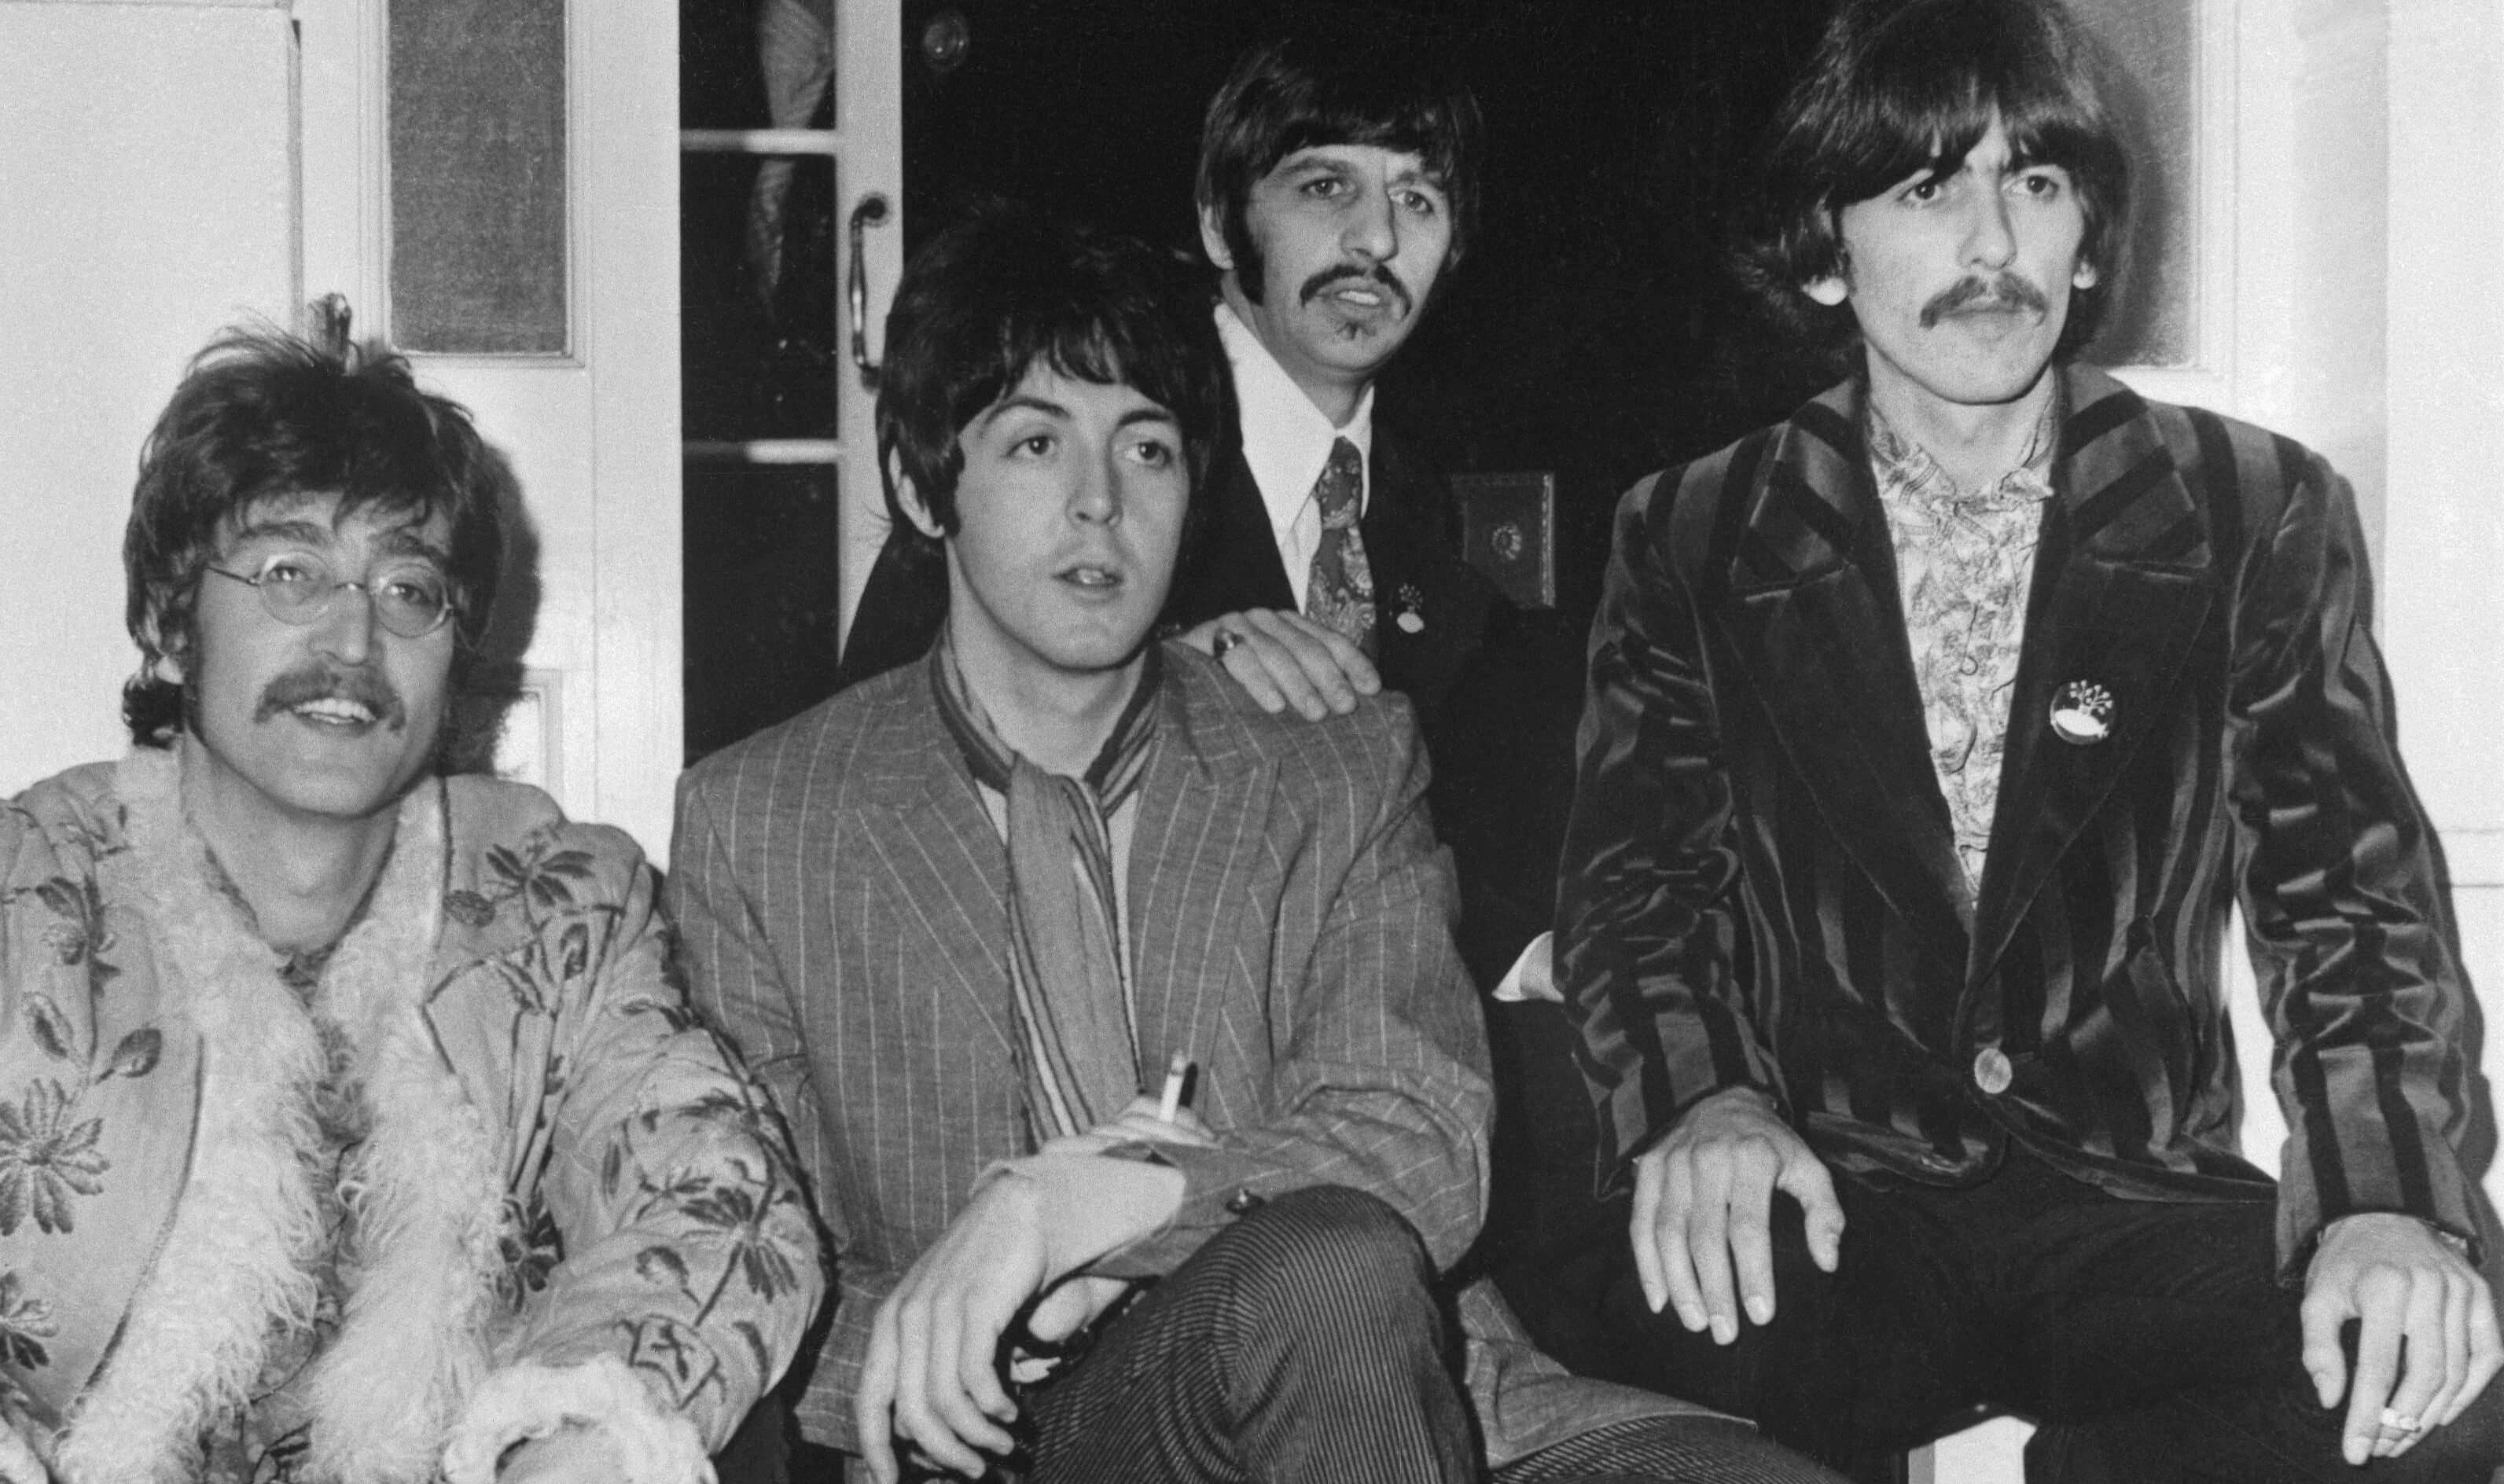 The Beatles in black-and-white during their psychedelic era